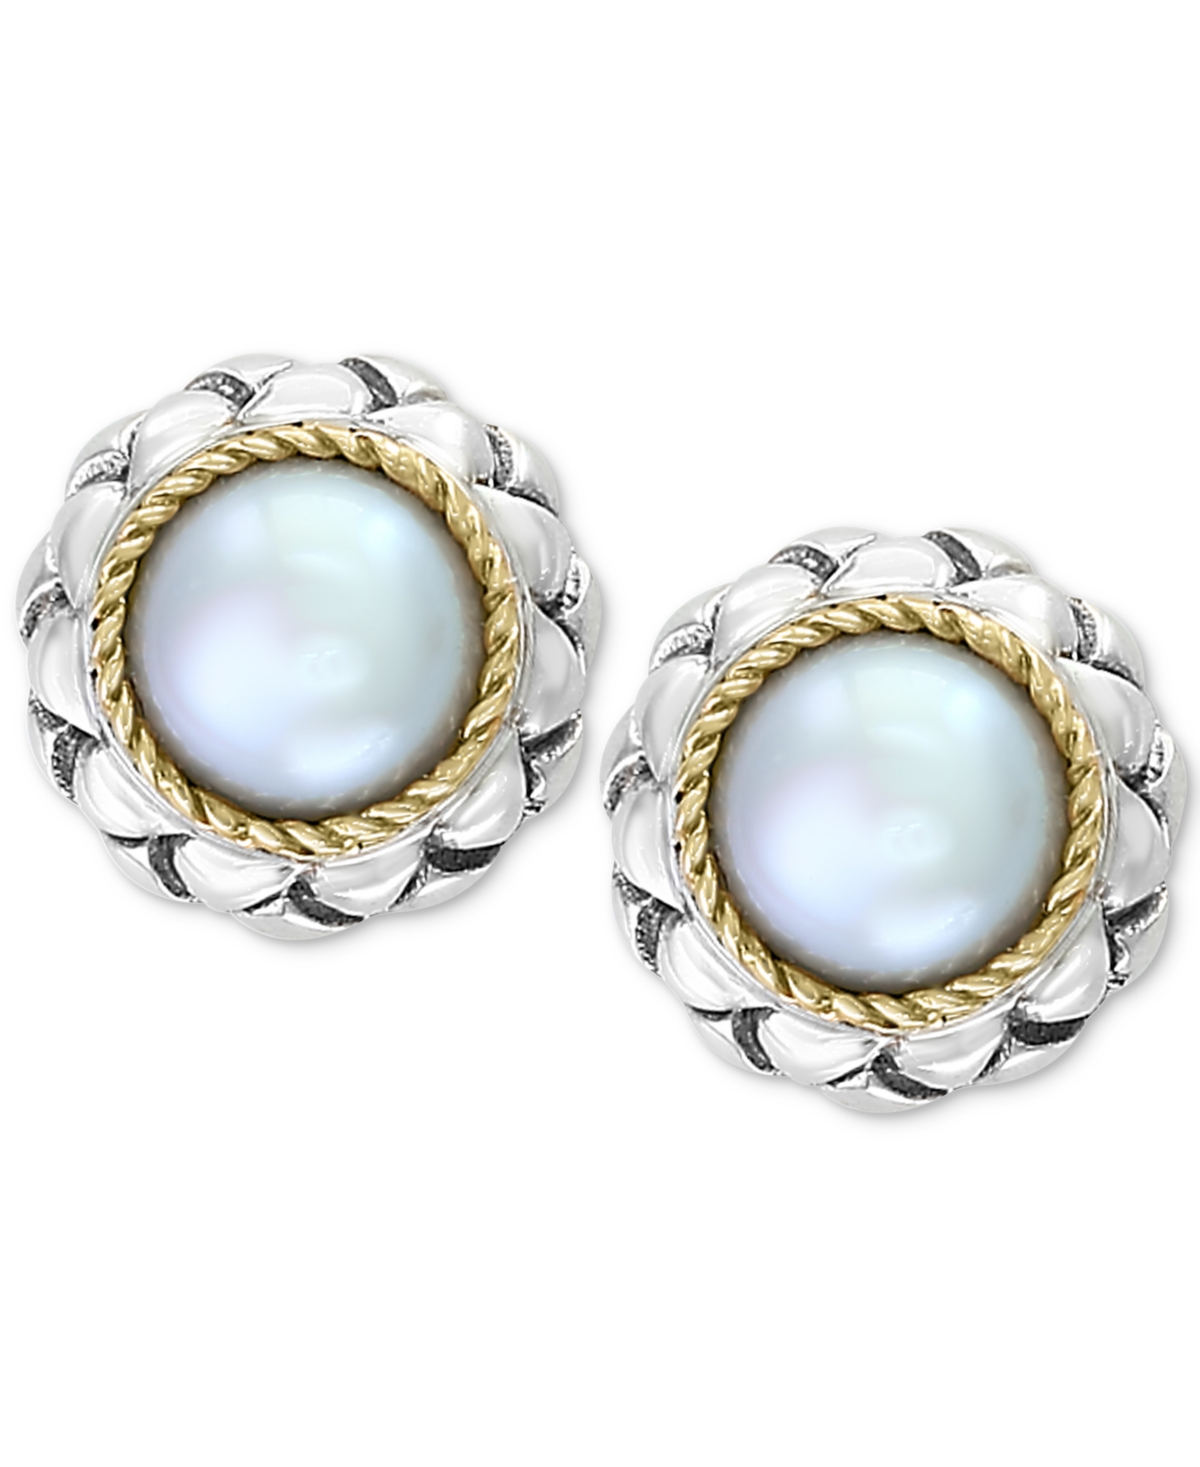 Effy Collection Effy Cultured Freshwater Pearl (8mm) Stud Earrings in Sterling Silver & 18k Gold